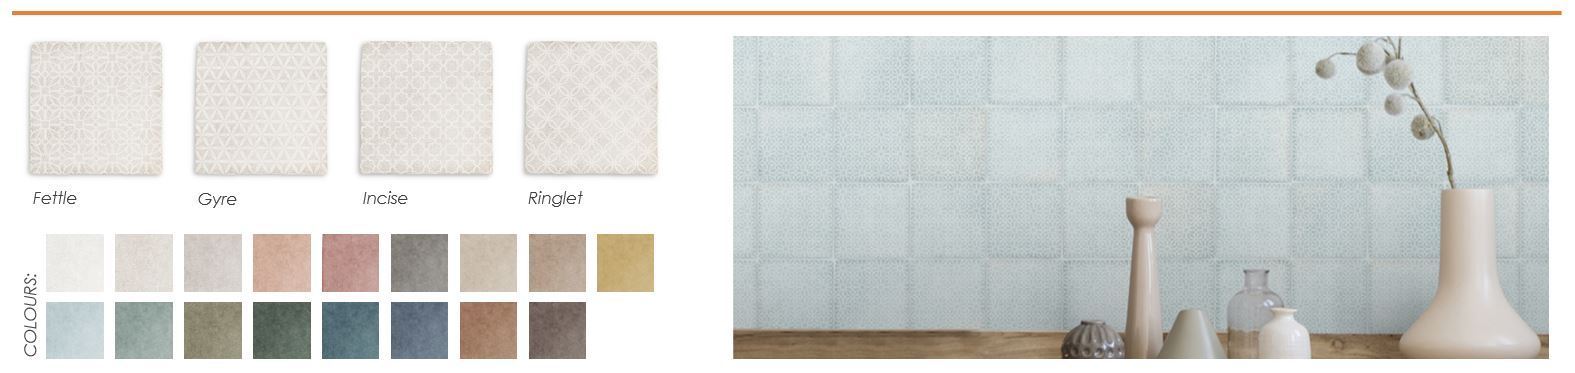 Silhouette Patterned Handmade Look Wall Tiles